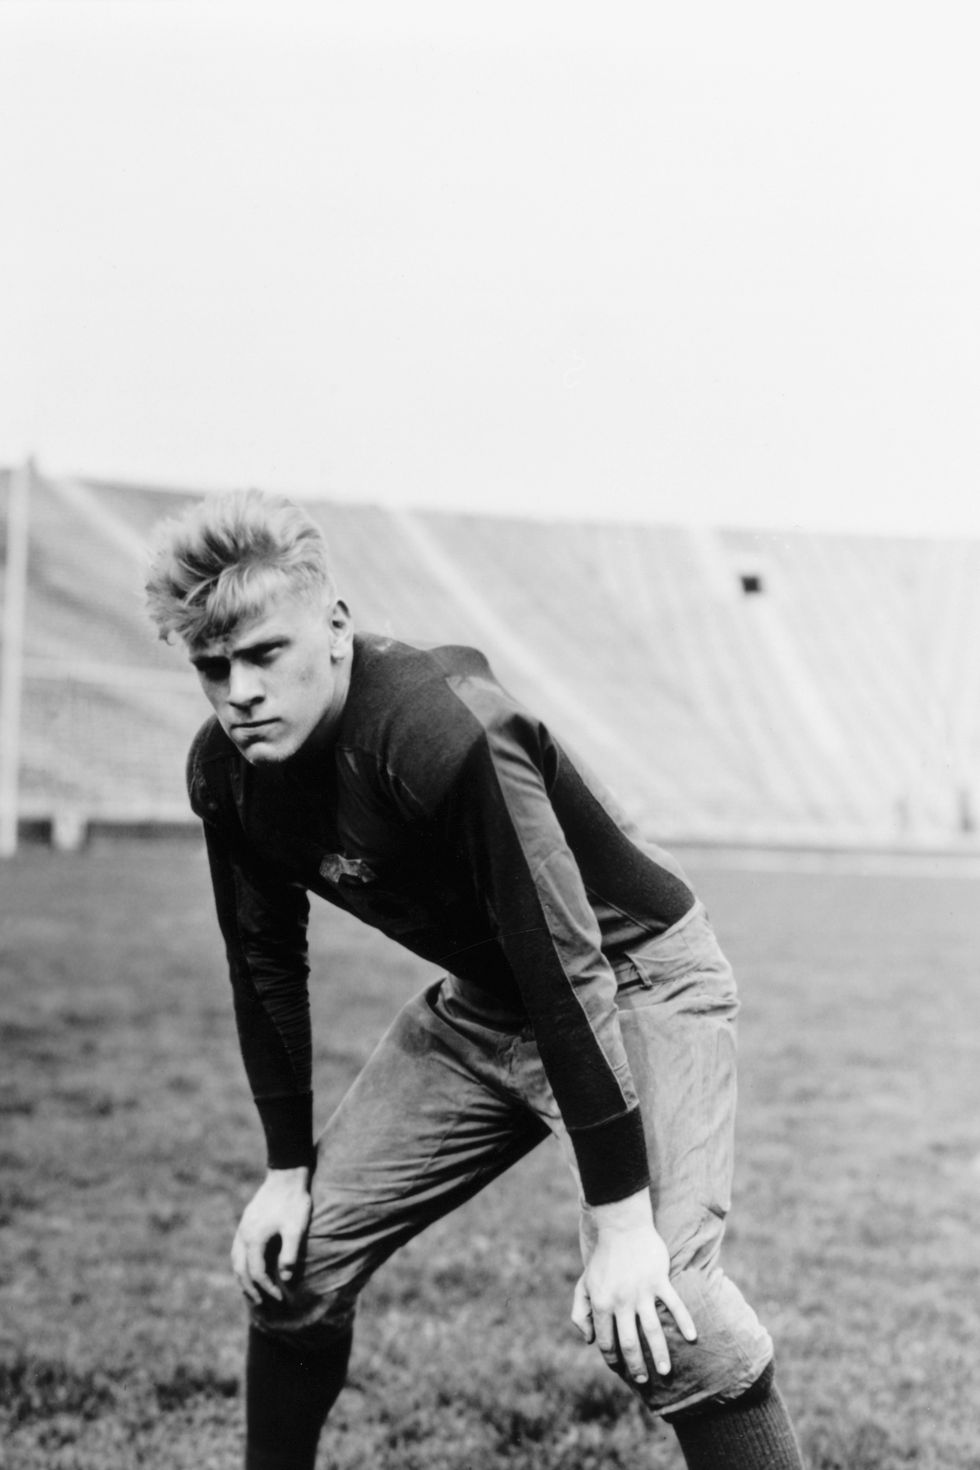 gerald ford in football garb